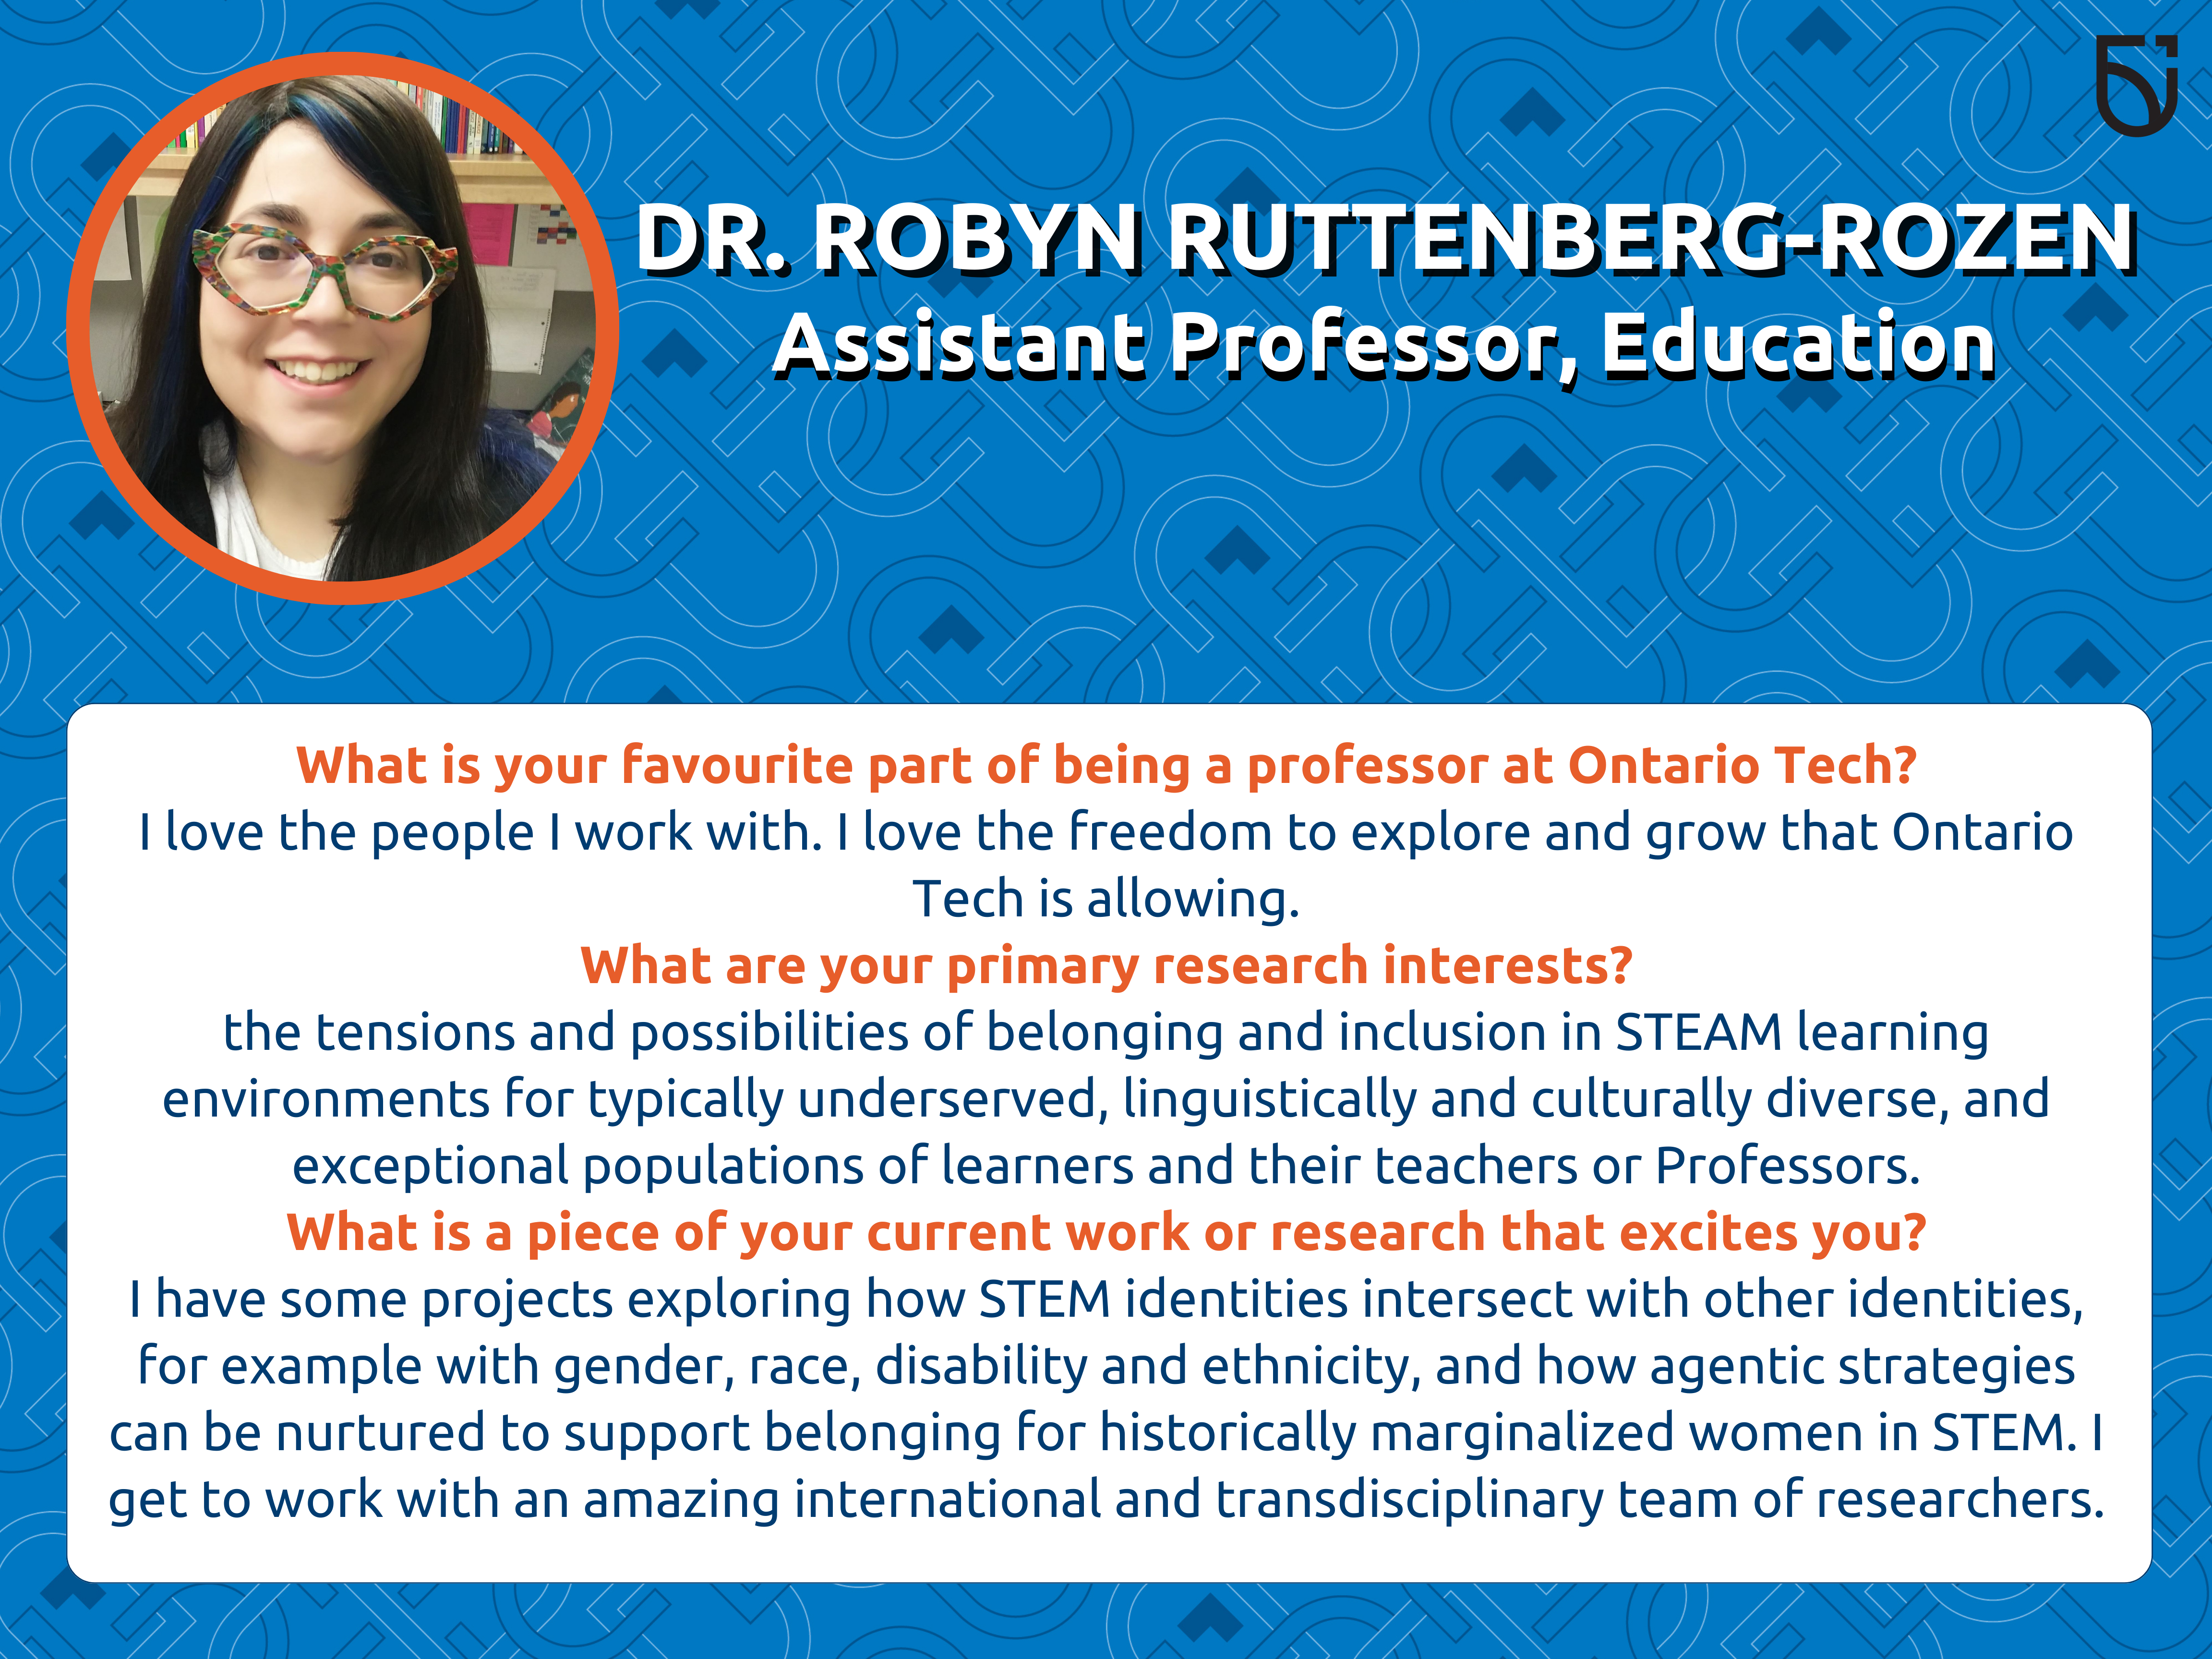 This photo is a Women’s Wednesday feature of Dr. Robyn Ruttenberg-Rozen, an Assistant Professor in the Mitch and Leslie Frazer Faculty of Education